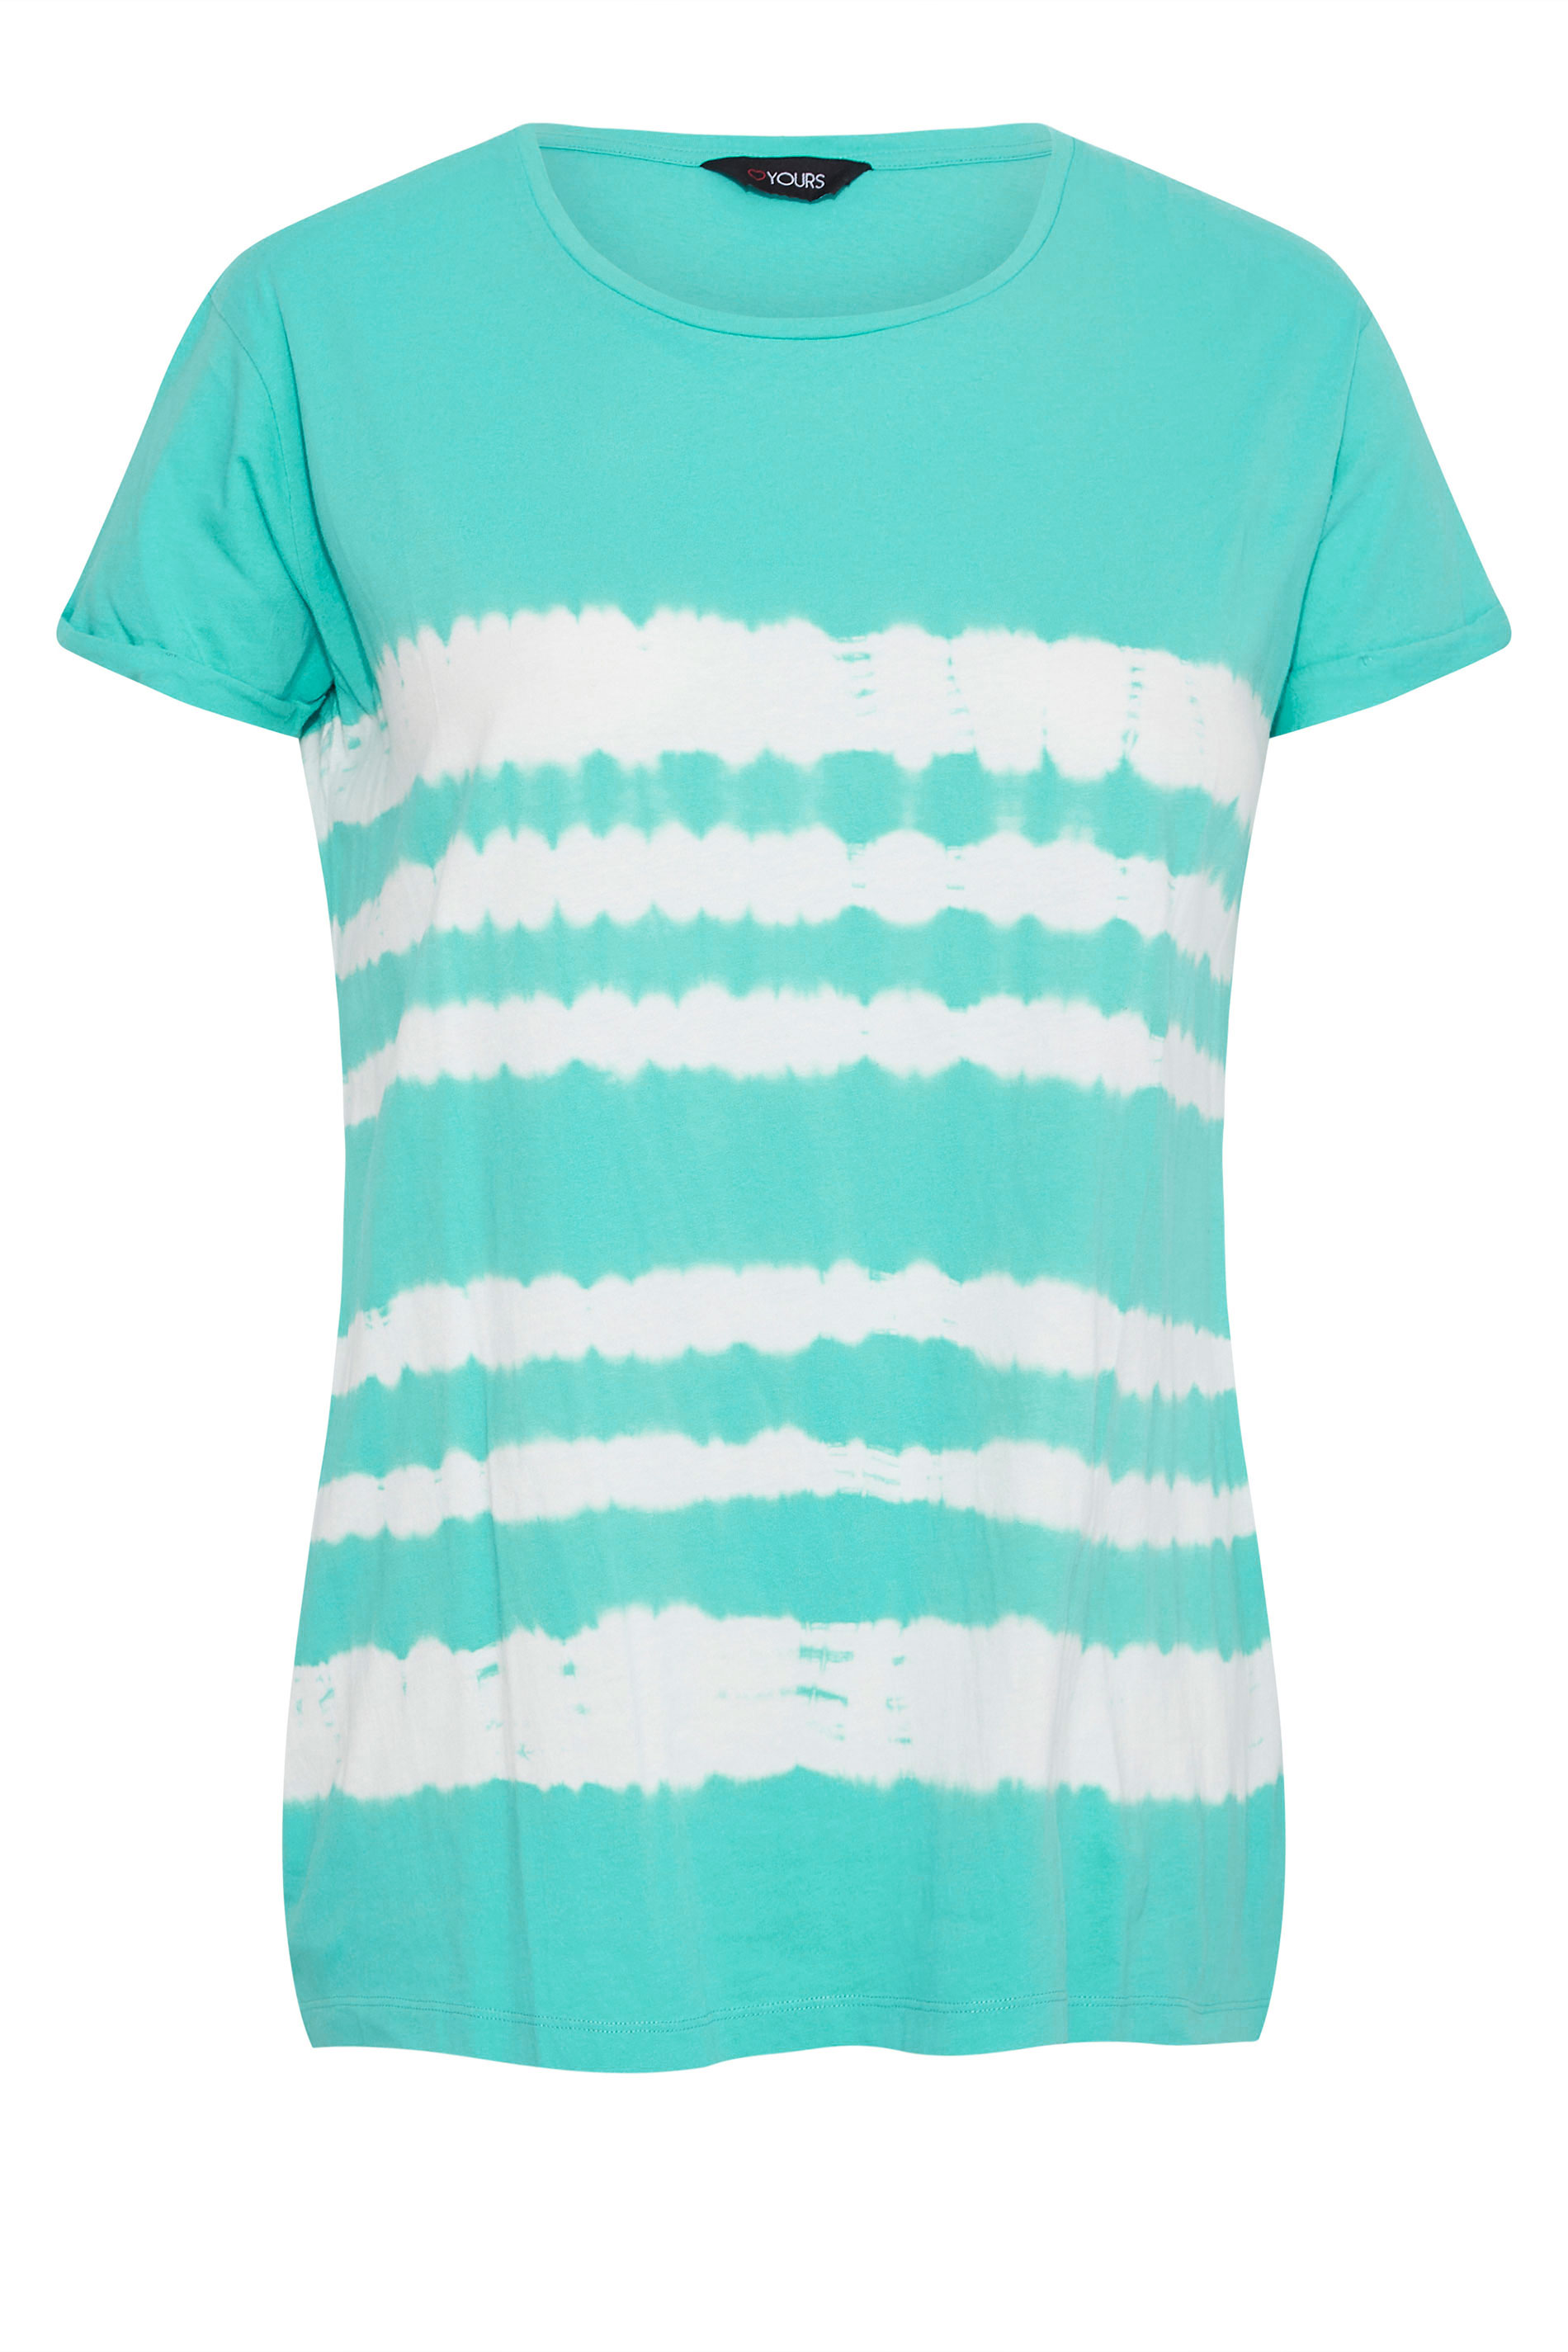 Grande taille  Tops Grande taille  Tops Jersey | YOURS FOR GOOD - T-Shirt Bleu Turquoise Manches Courtes Tie & Dye - JA35903